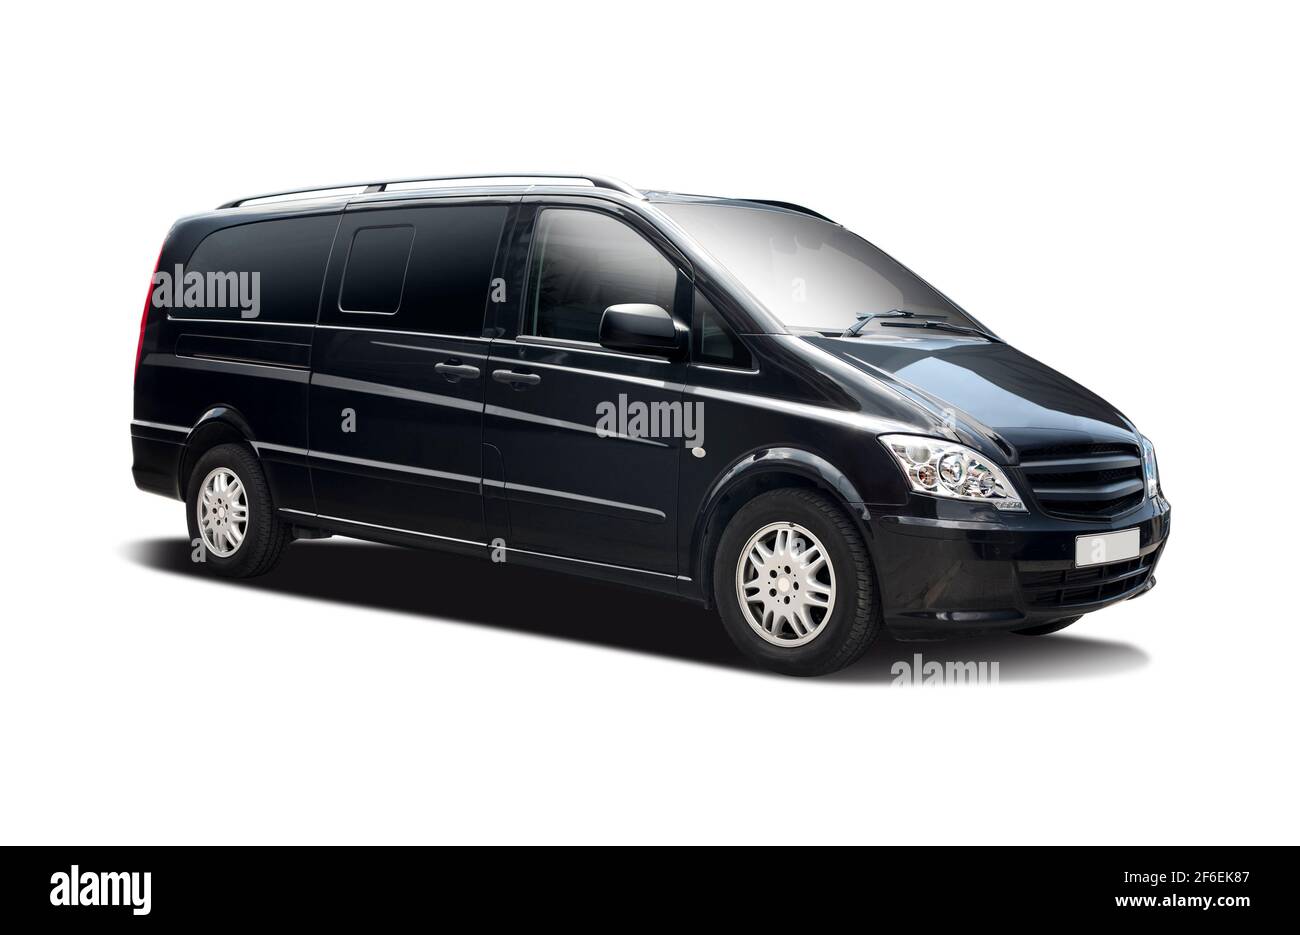 Black German van side view isolated on white ready for branding Stock Photo